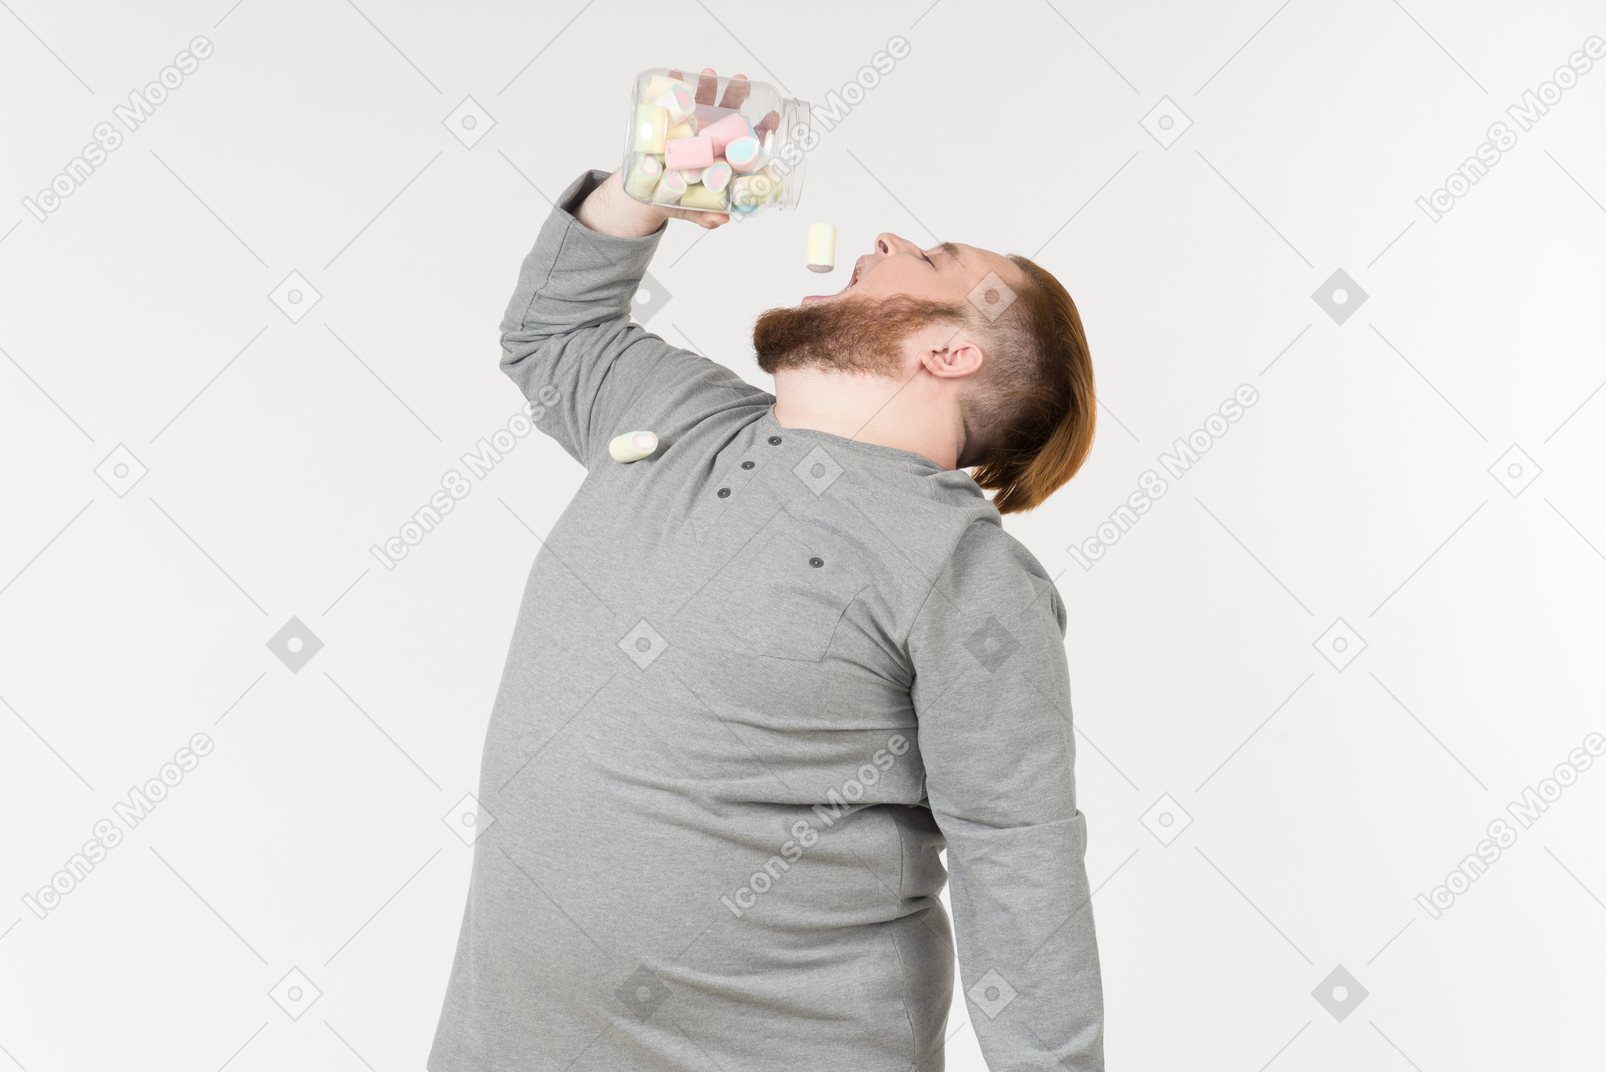 Bid bearded man throwing marshmallows from the jar into a mouth